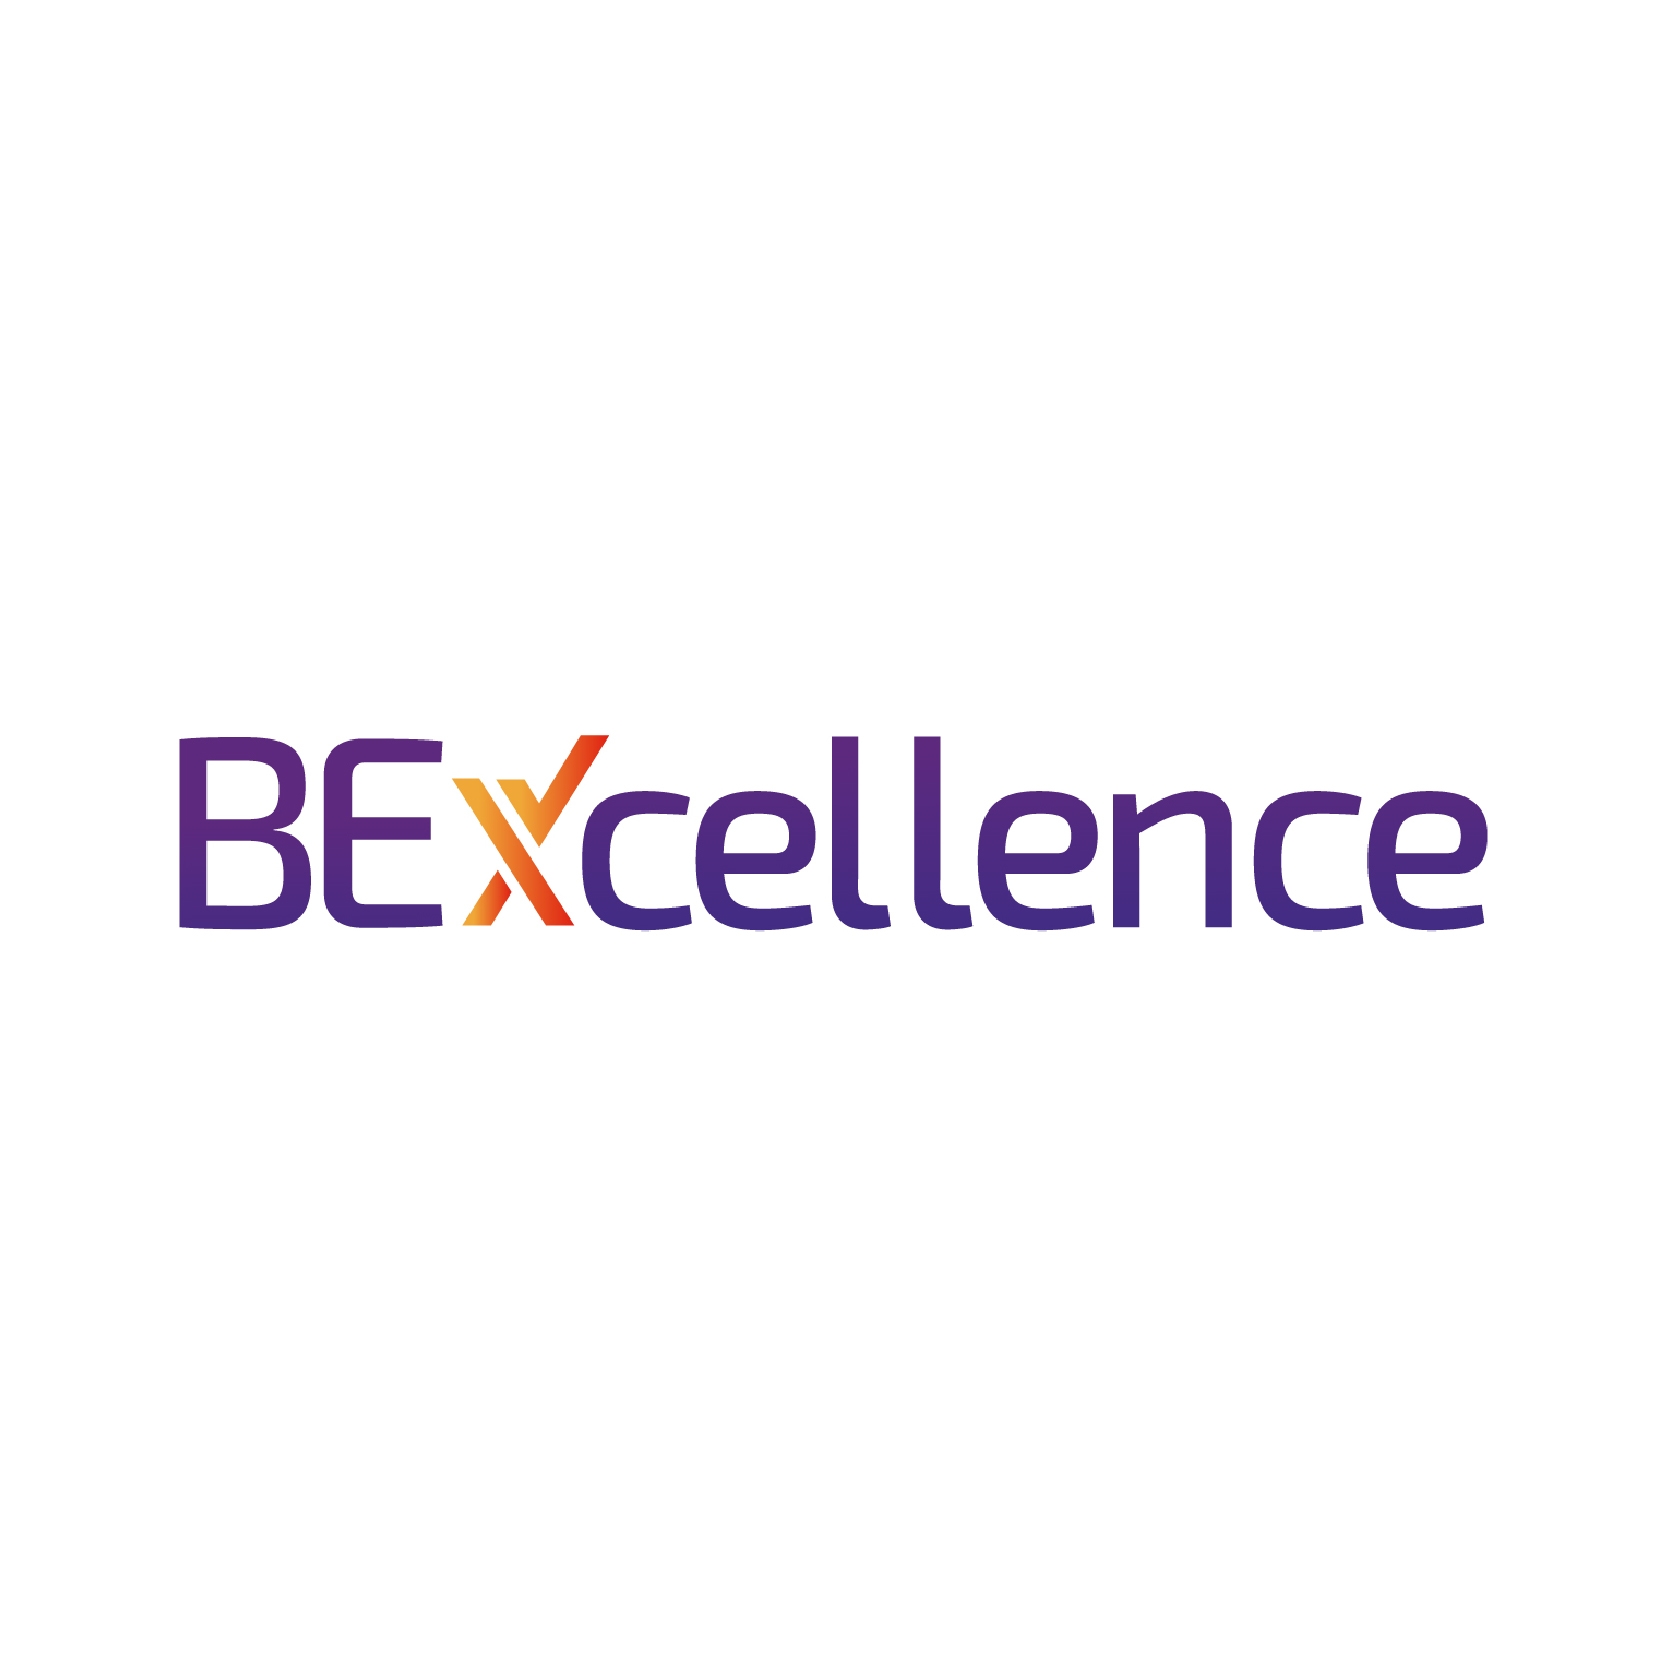 BEXcellence